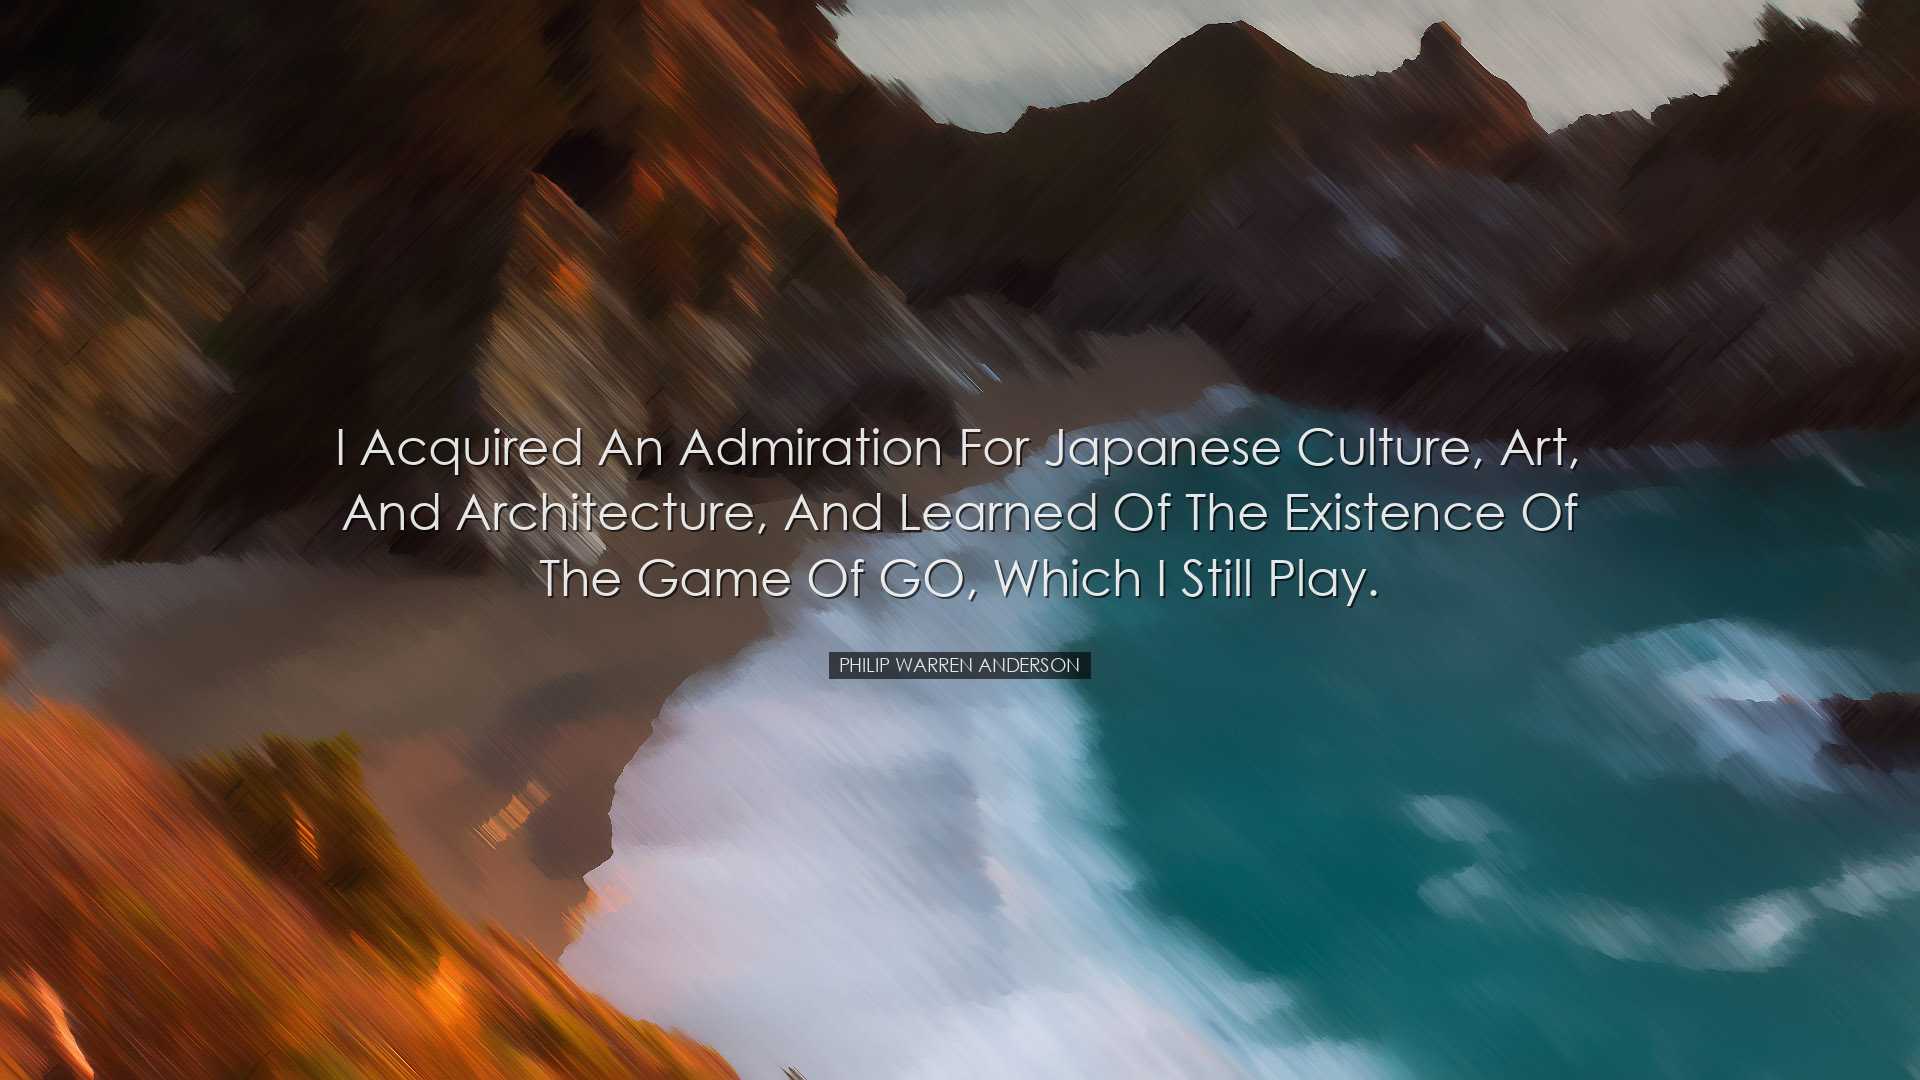 I acquired an admiration for Japanese culture, art, and architectu